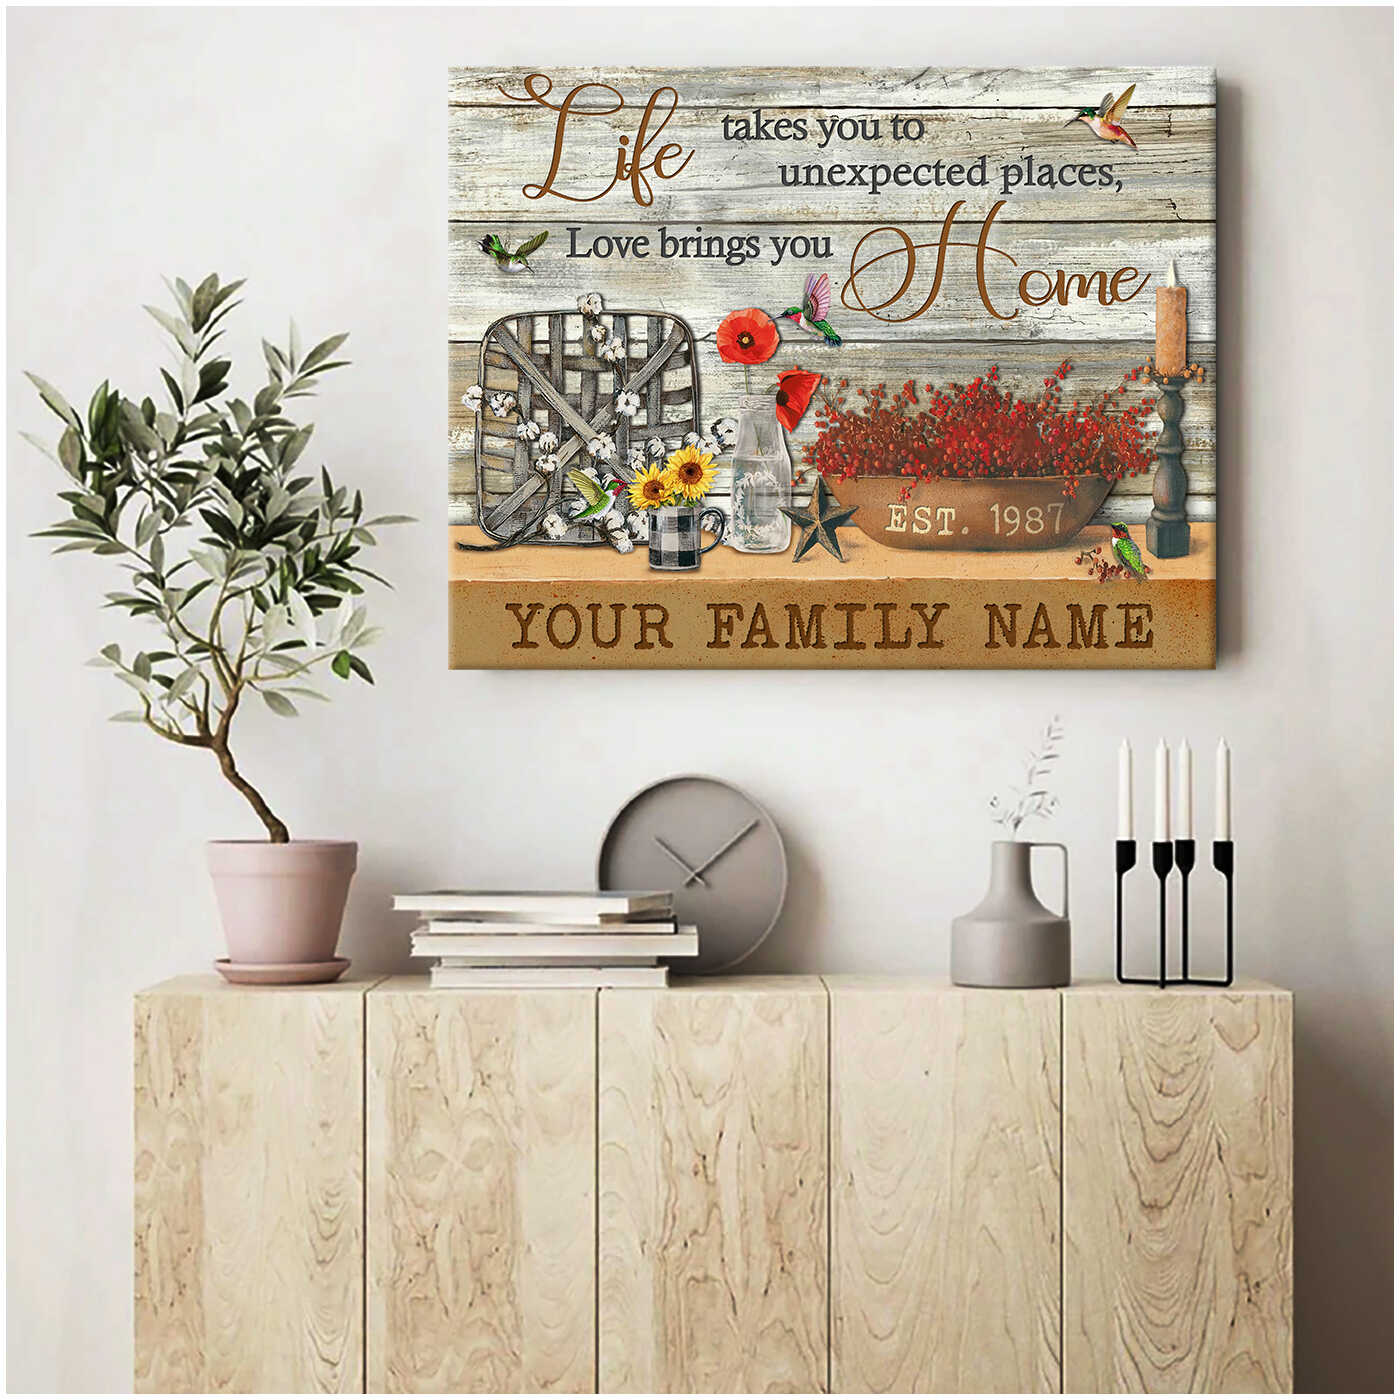 Farmhouse Decor And Hummingbirds On Vintage Rustic Wood Life Takes You To Unexpected Places